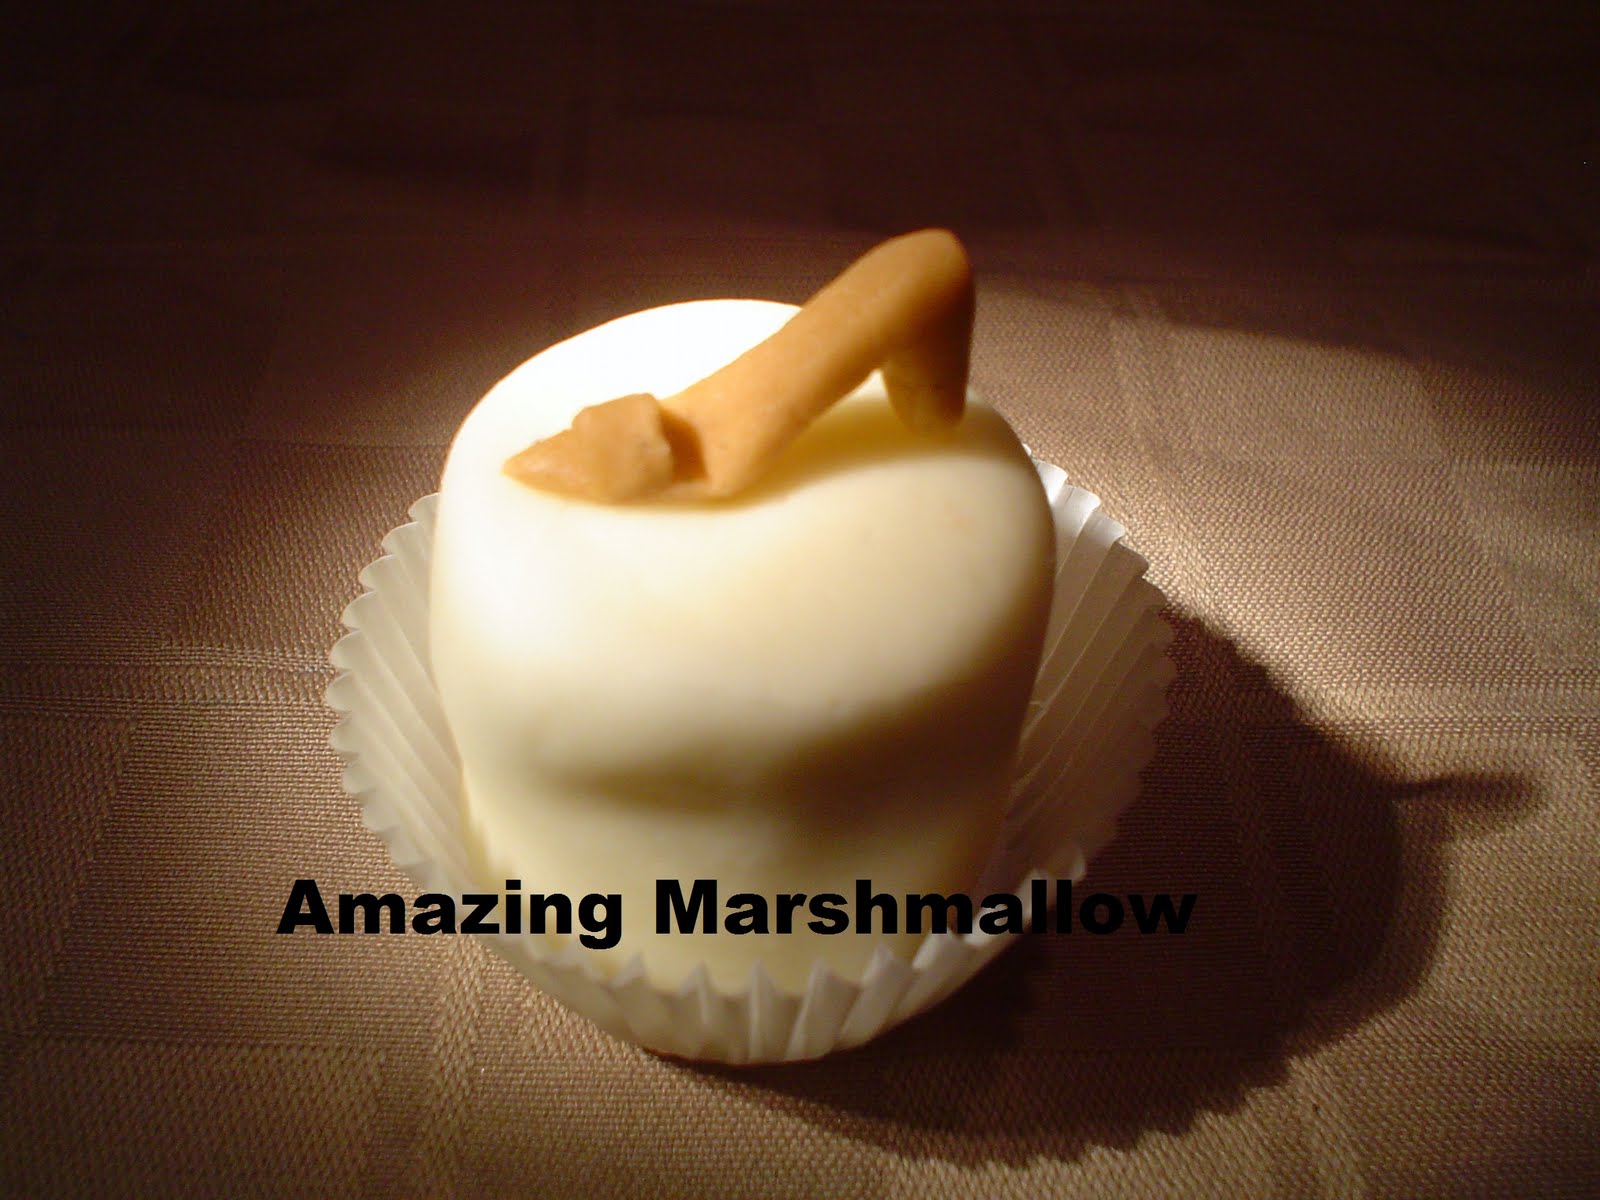 Amazing Marshmallows: If the shoe fits...